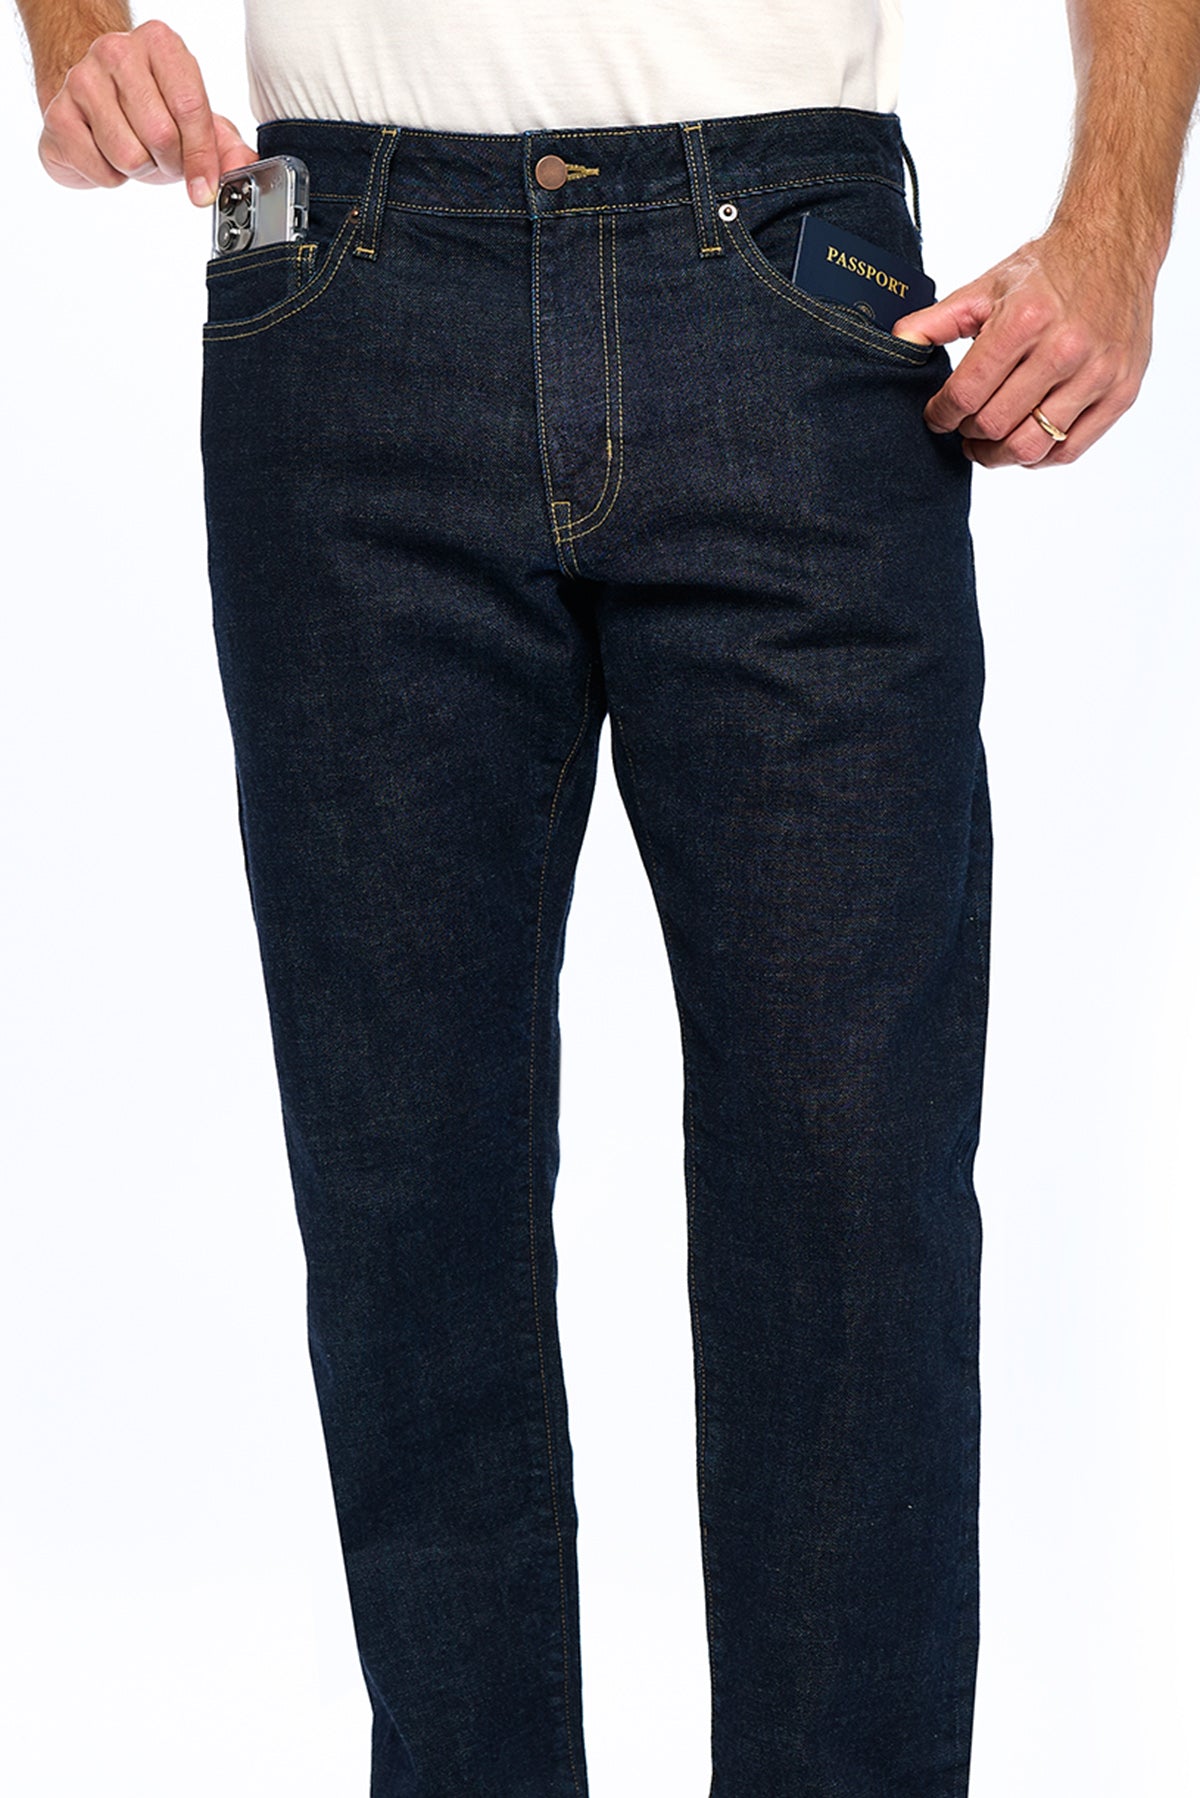 The Best Travel Jeans for | Selvedge Dark Indigo | Made in the USA Aviator